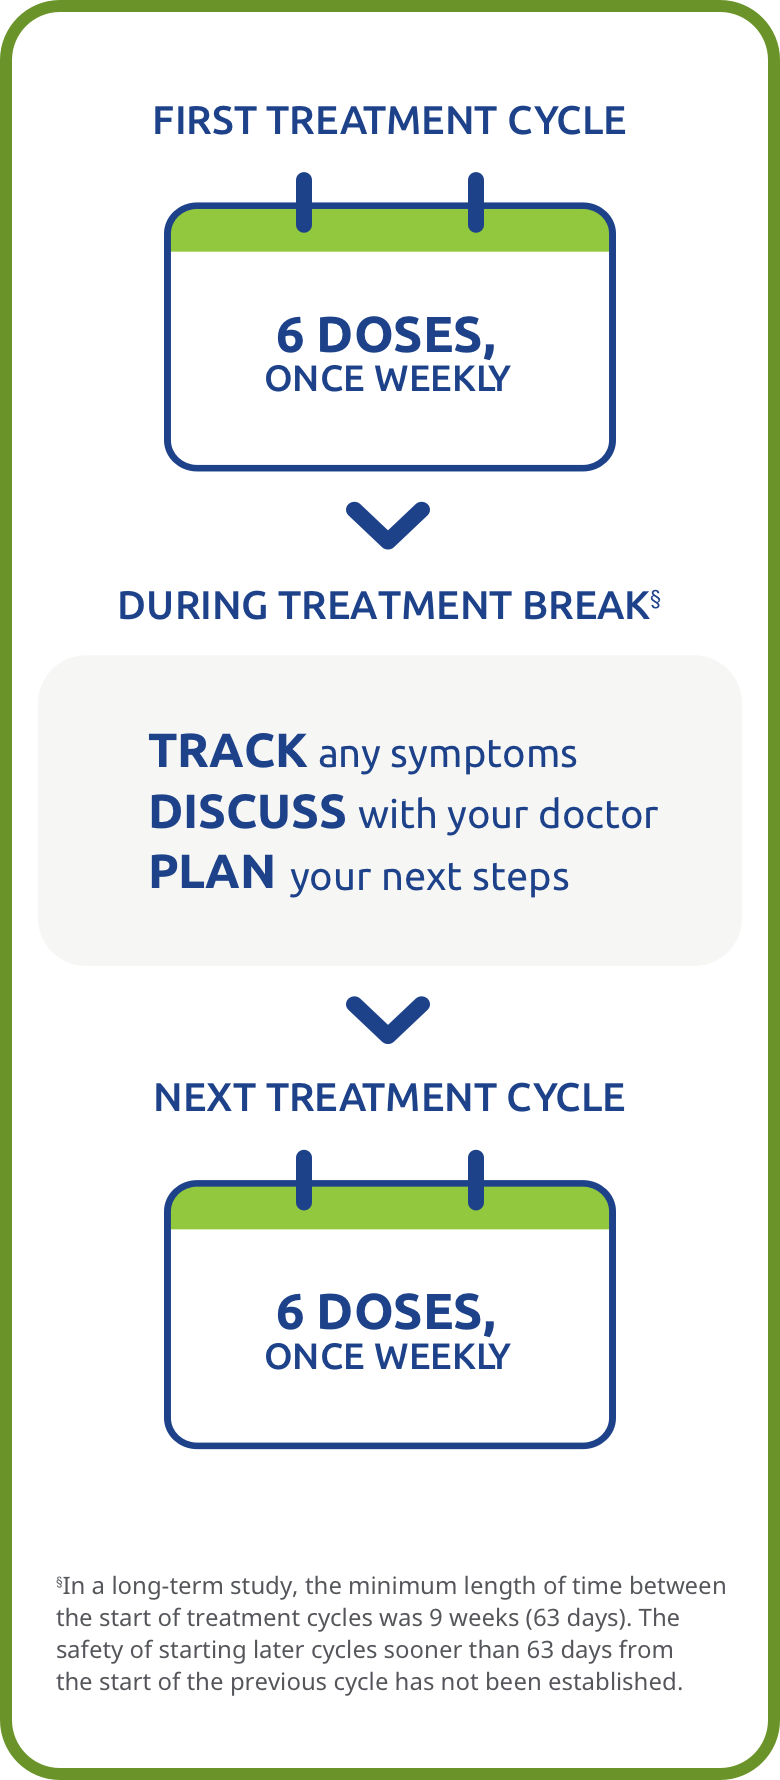 First treatment cycle. 6 doses, once weekly. Treatment break. In between cycles: Track any symptoms. Discuss with your doctor. Plan for your next visit. Next treatment cycle. 6 doses, once weekly.